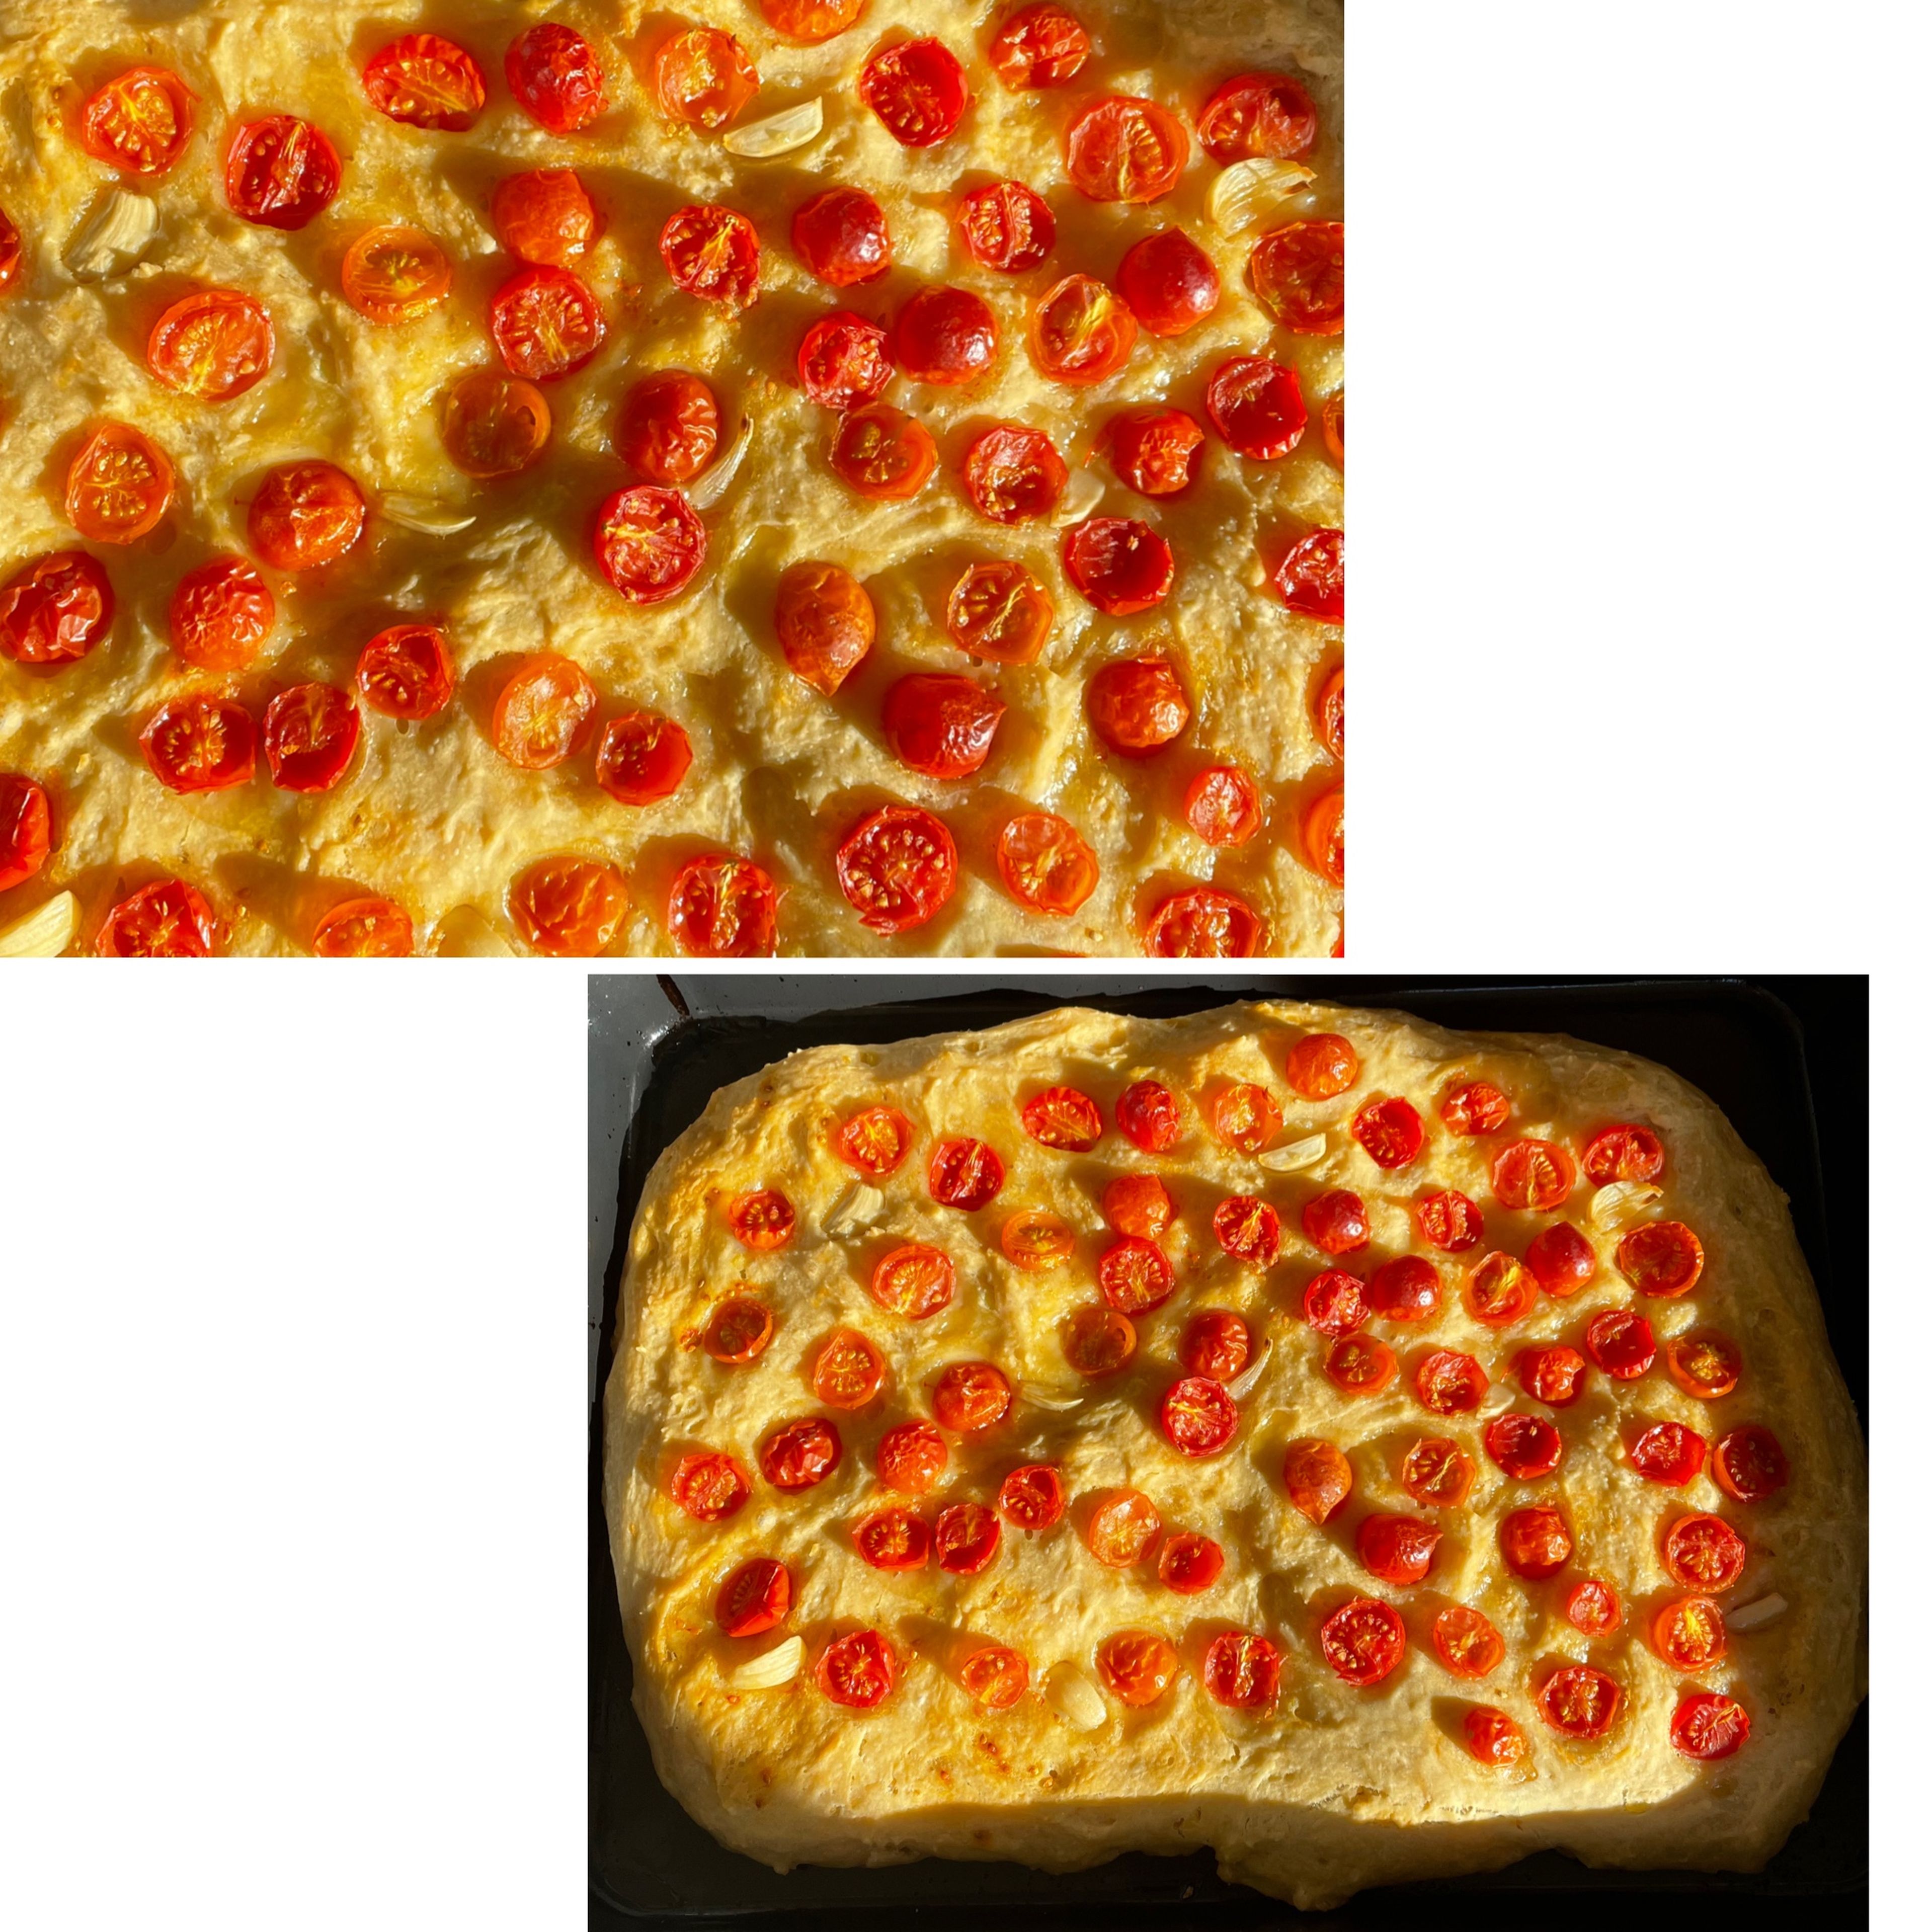 Bake in the oven (static) at 180 degrees for around 30/40 minutes until the focaccia surface gets golden. Enjoy!